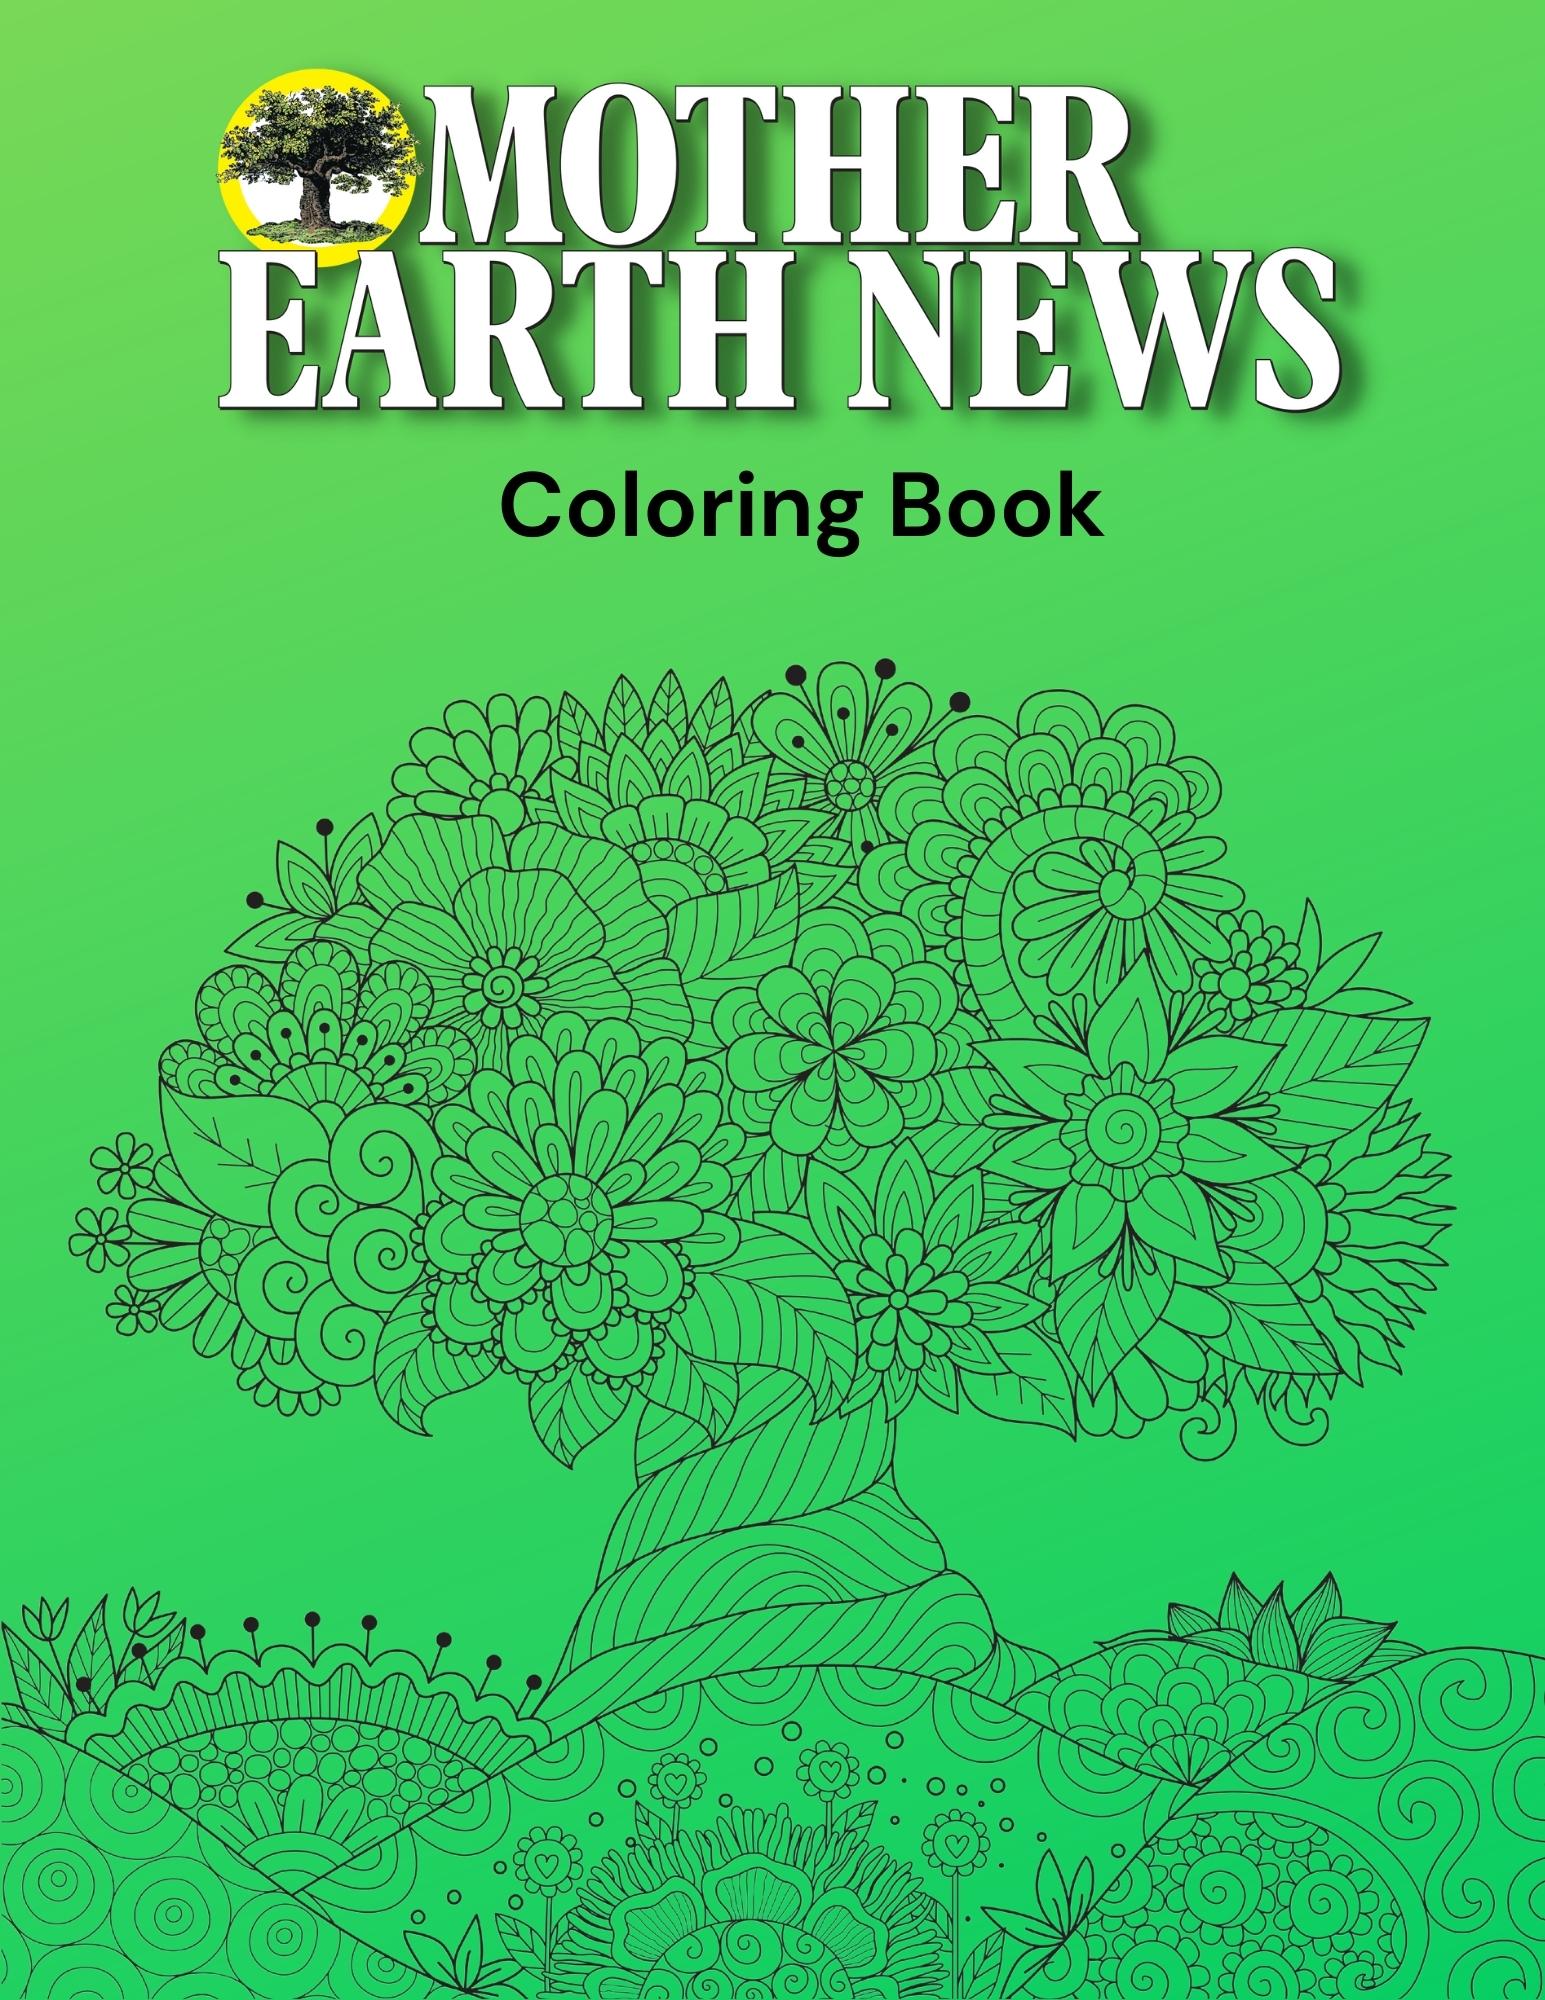 Mother Earth News Coloring Book